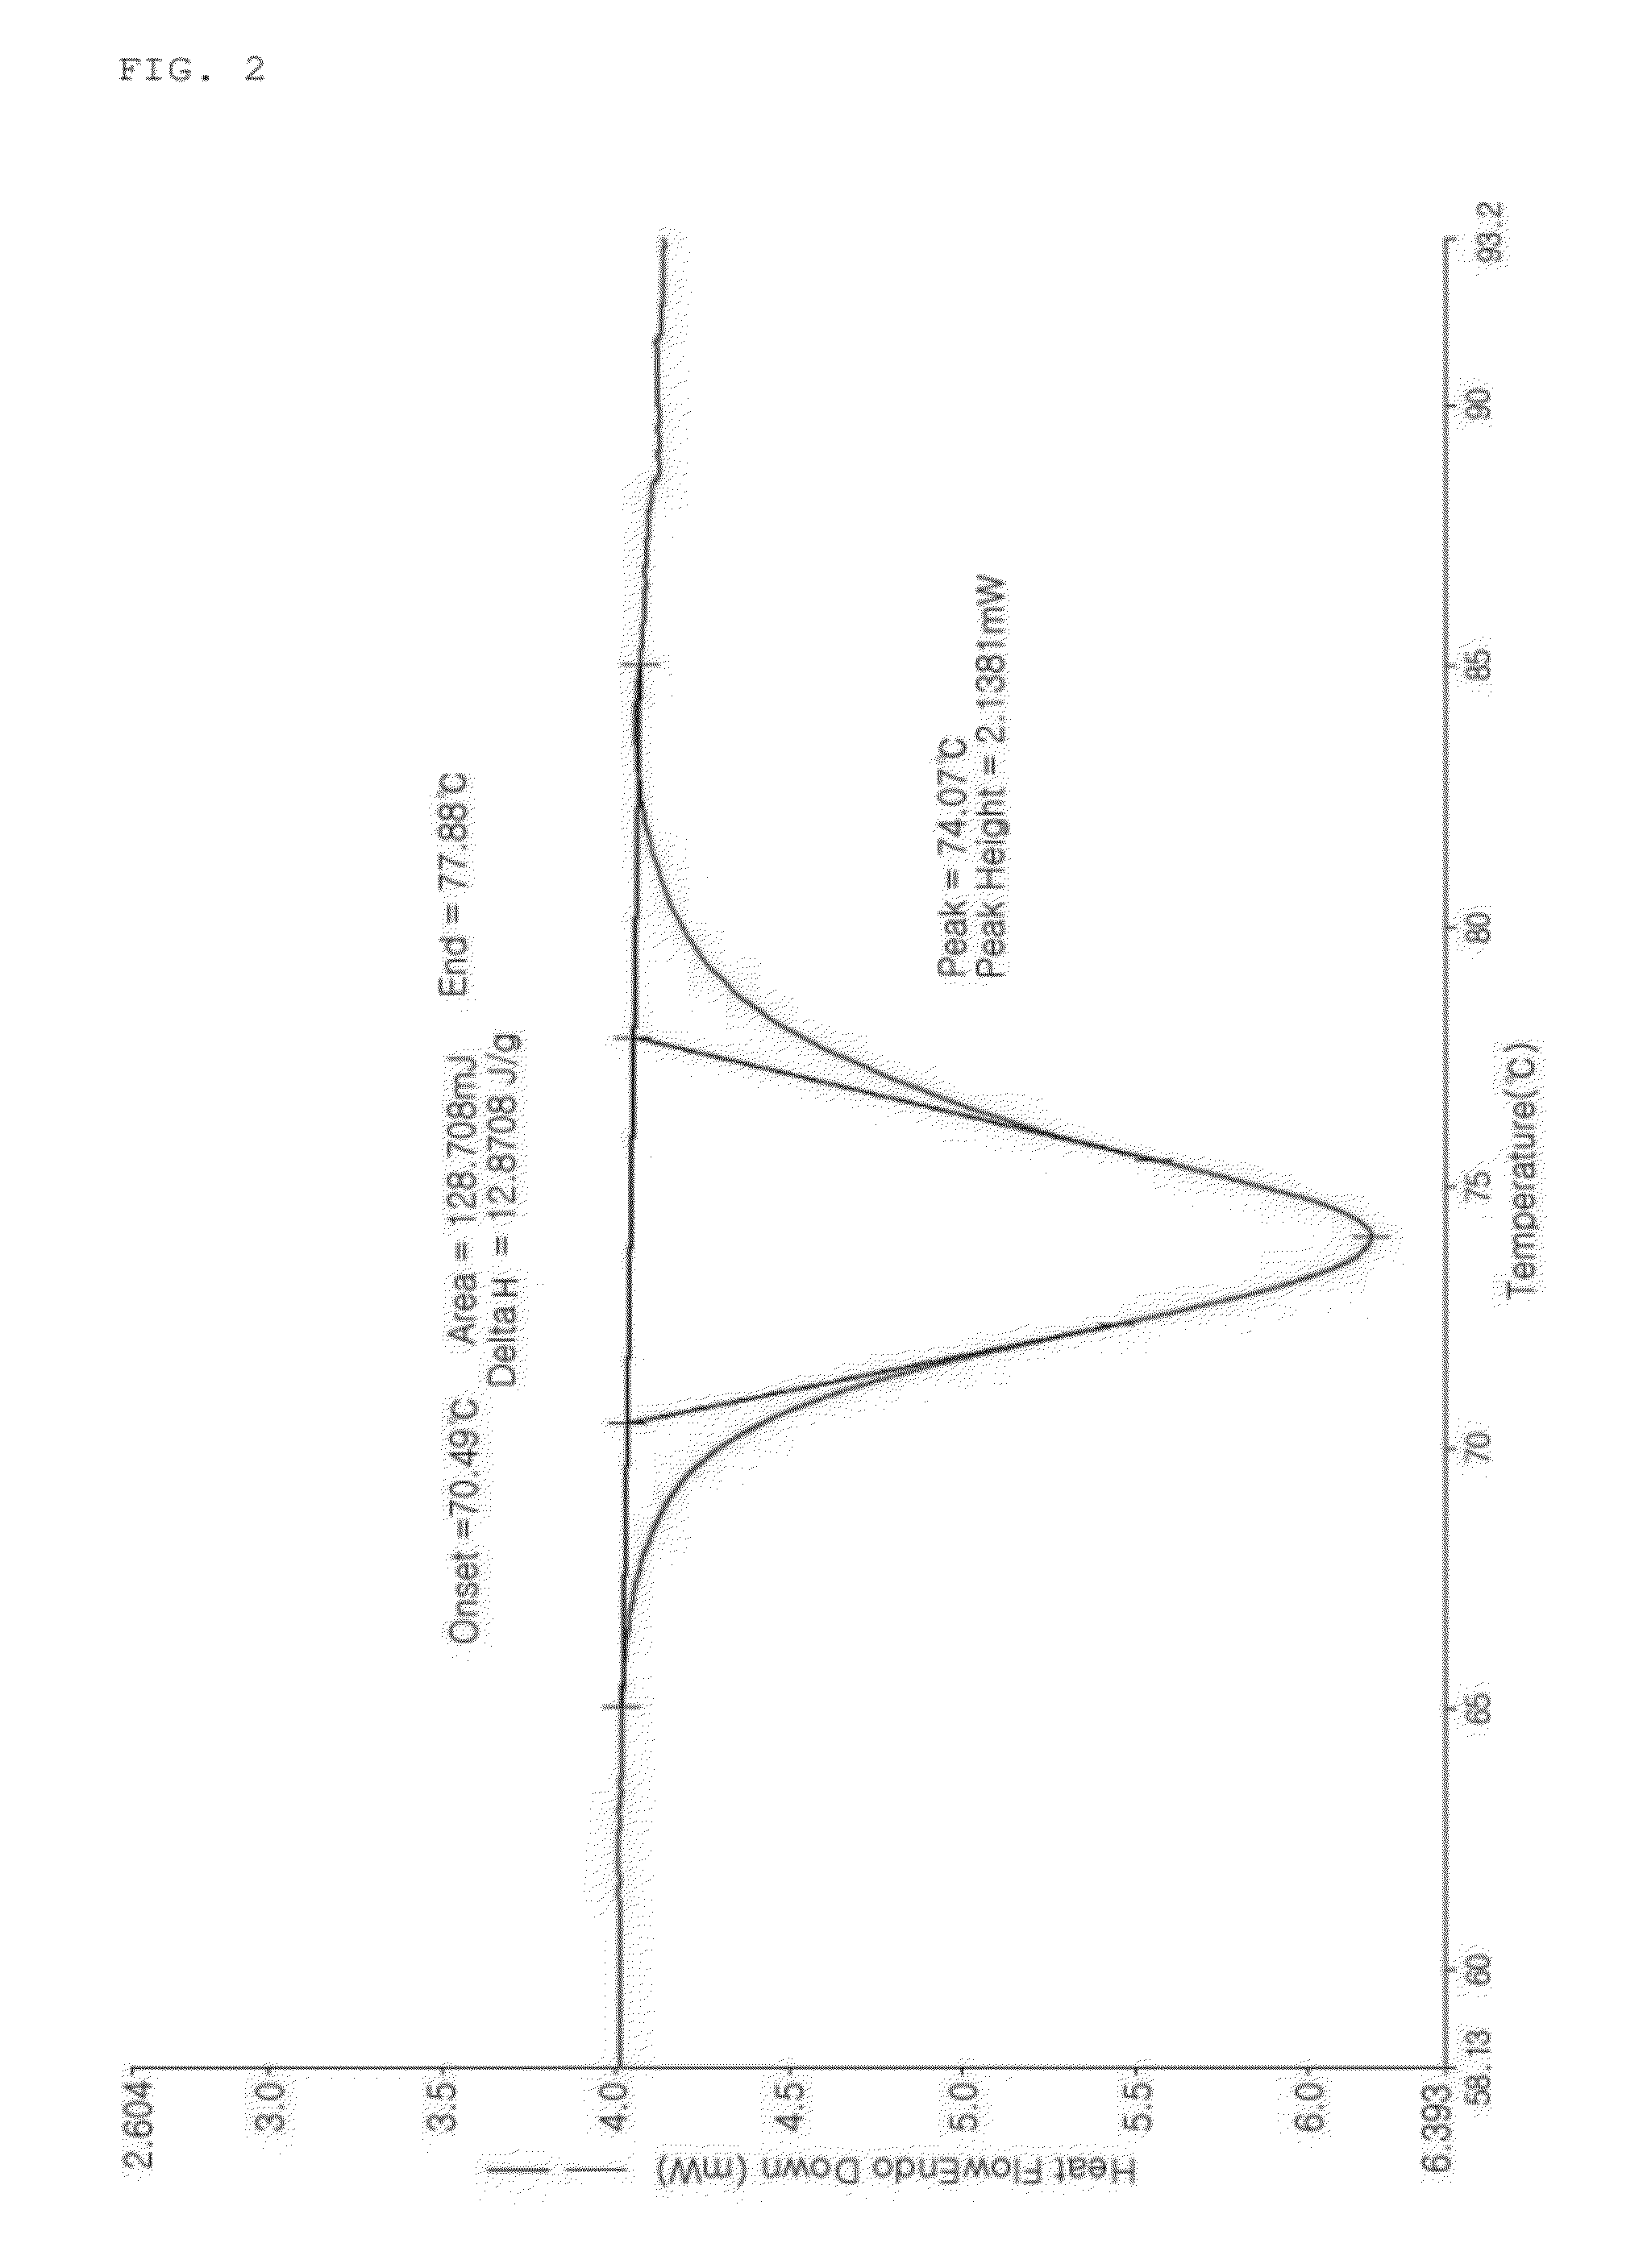 Method for preparing fibrous starch with enhanced emulsifying capacity and low-fat mayonnaise and margarine compositions using the same